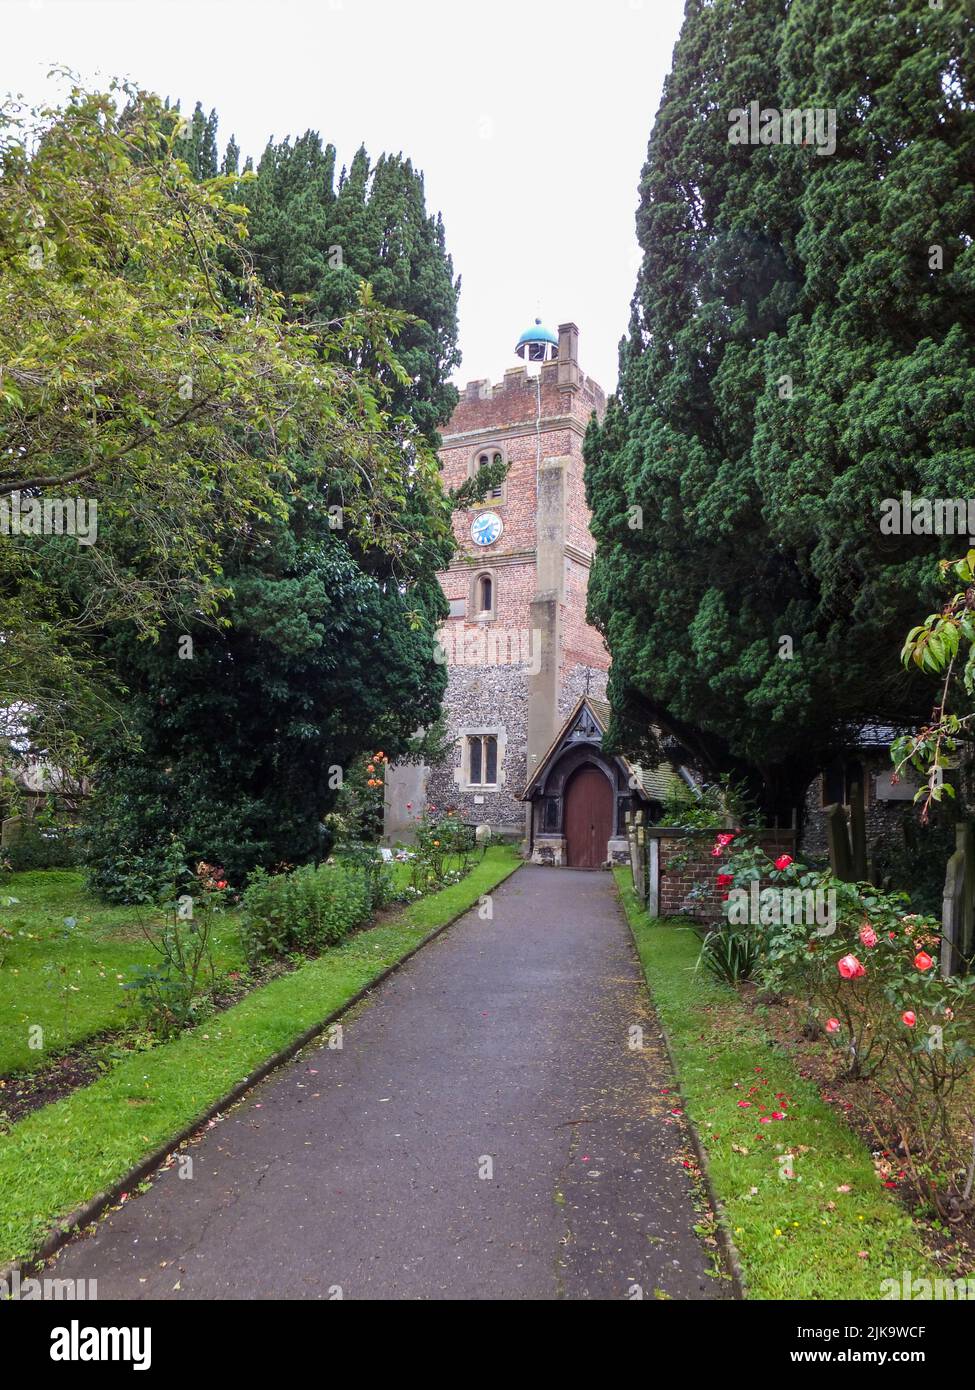 A sidewalk leads to historic St. Mary the Virgin Church in Harmondsworth, Hillingdon, Middlesex, London, England, UK. Stock Photo